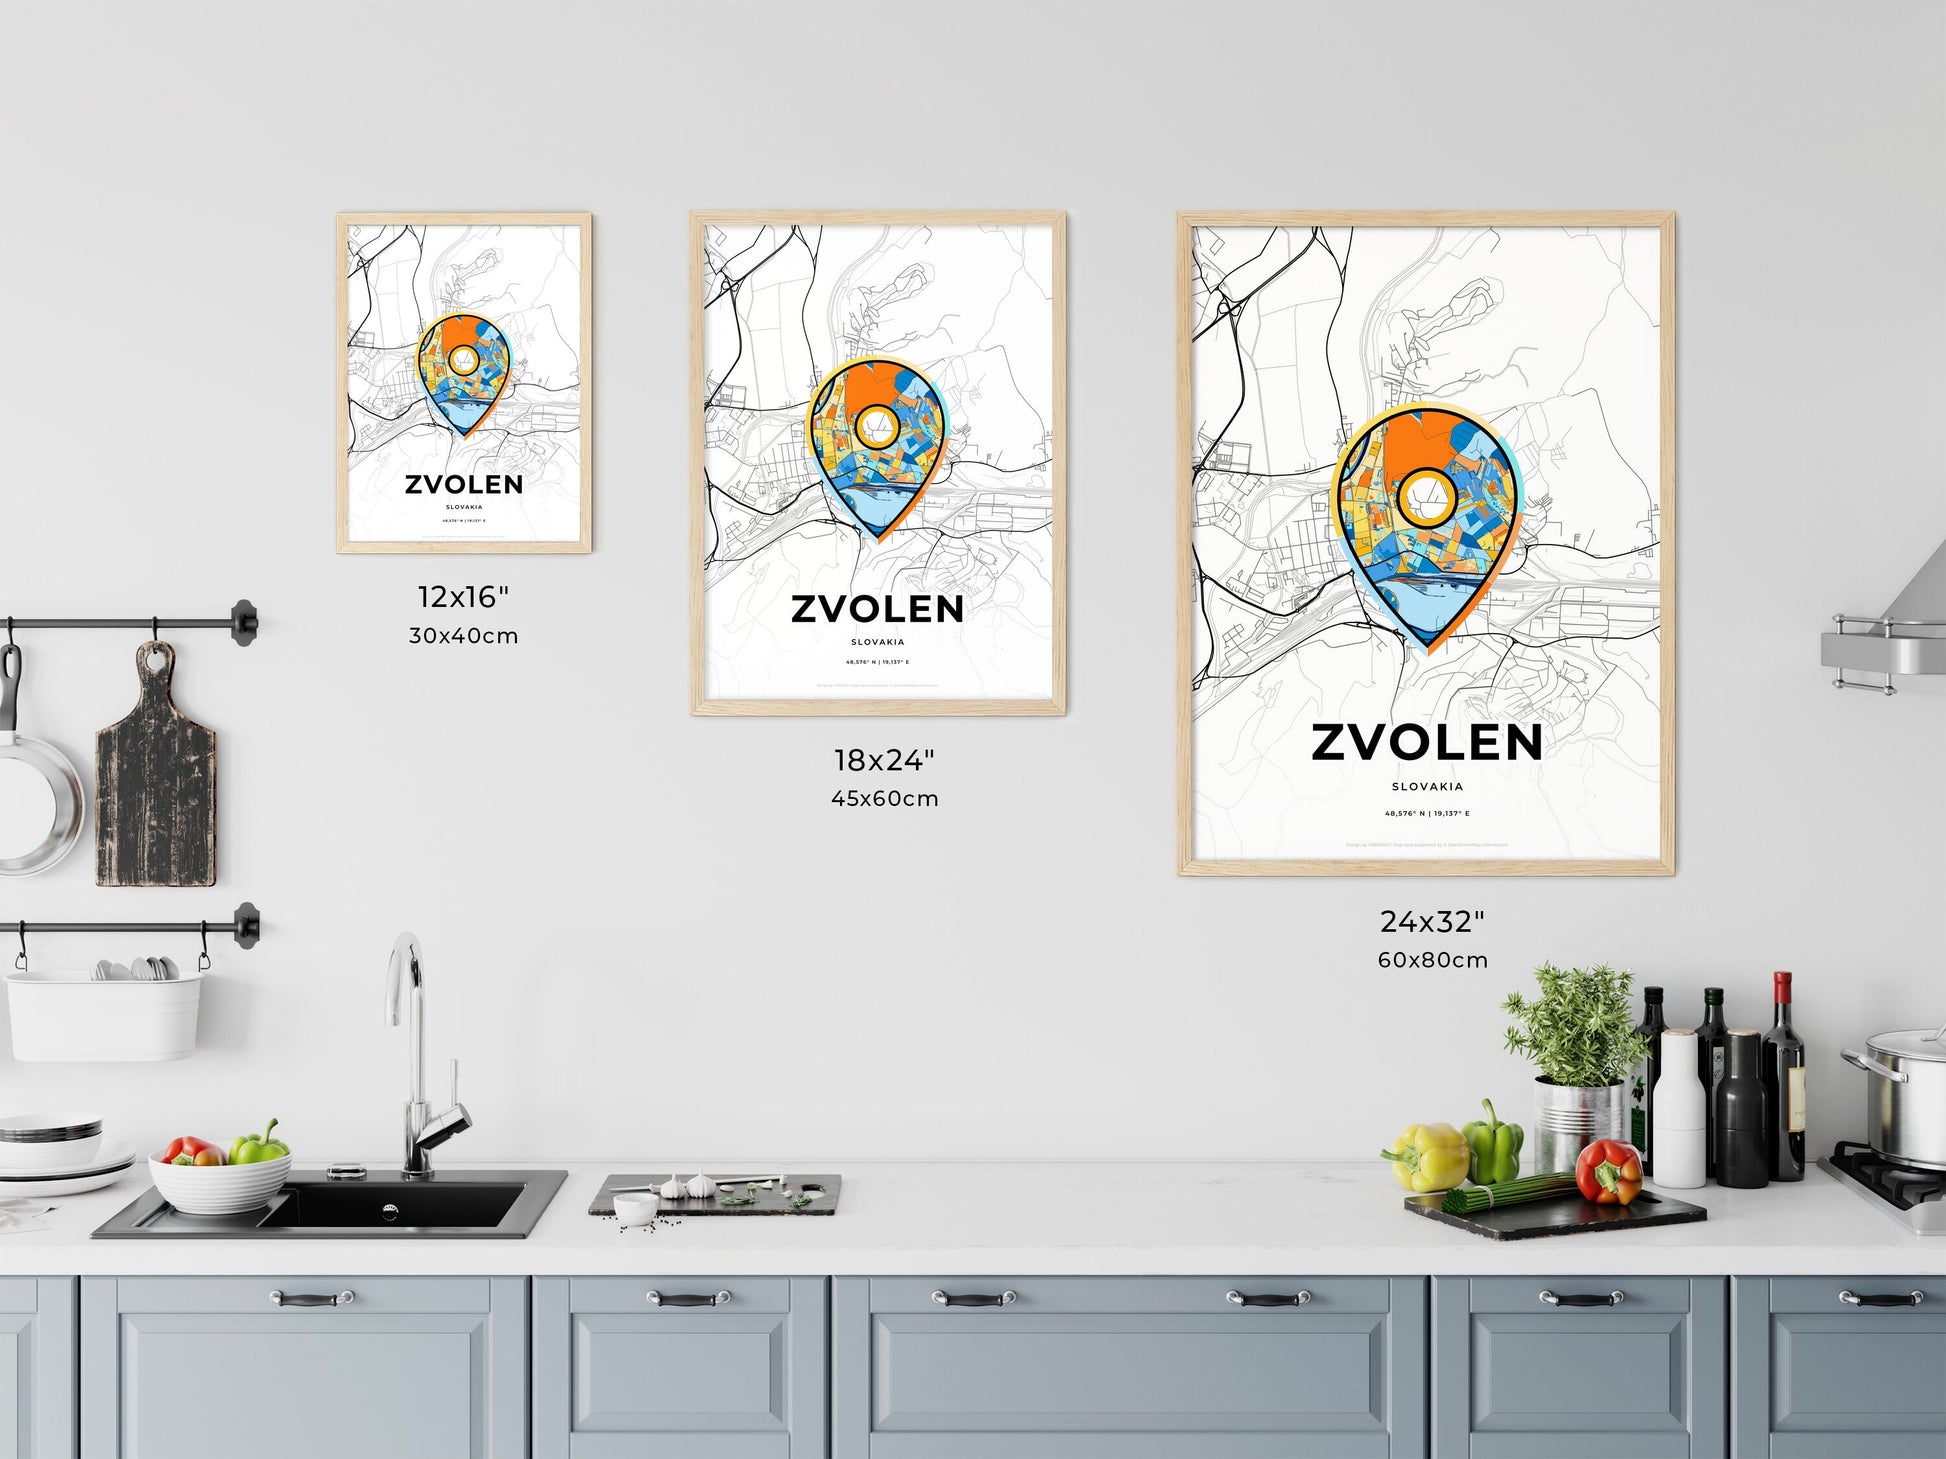 ZVOLEN SLOVAKIA minimal art map with a colorful icon. Where it all began, Couple map gift.